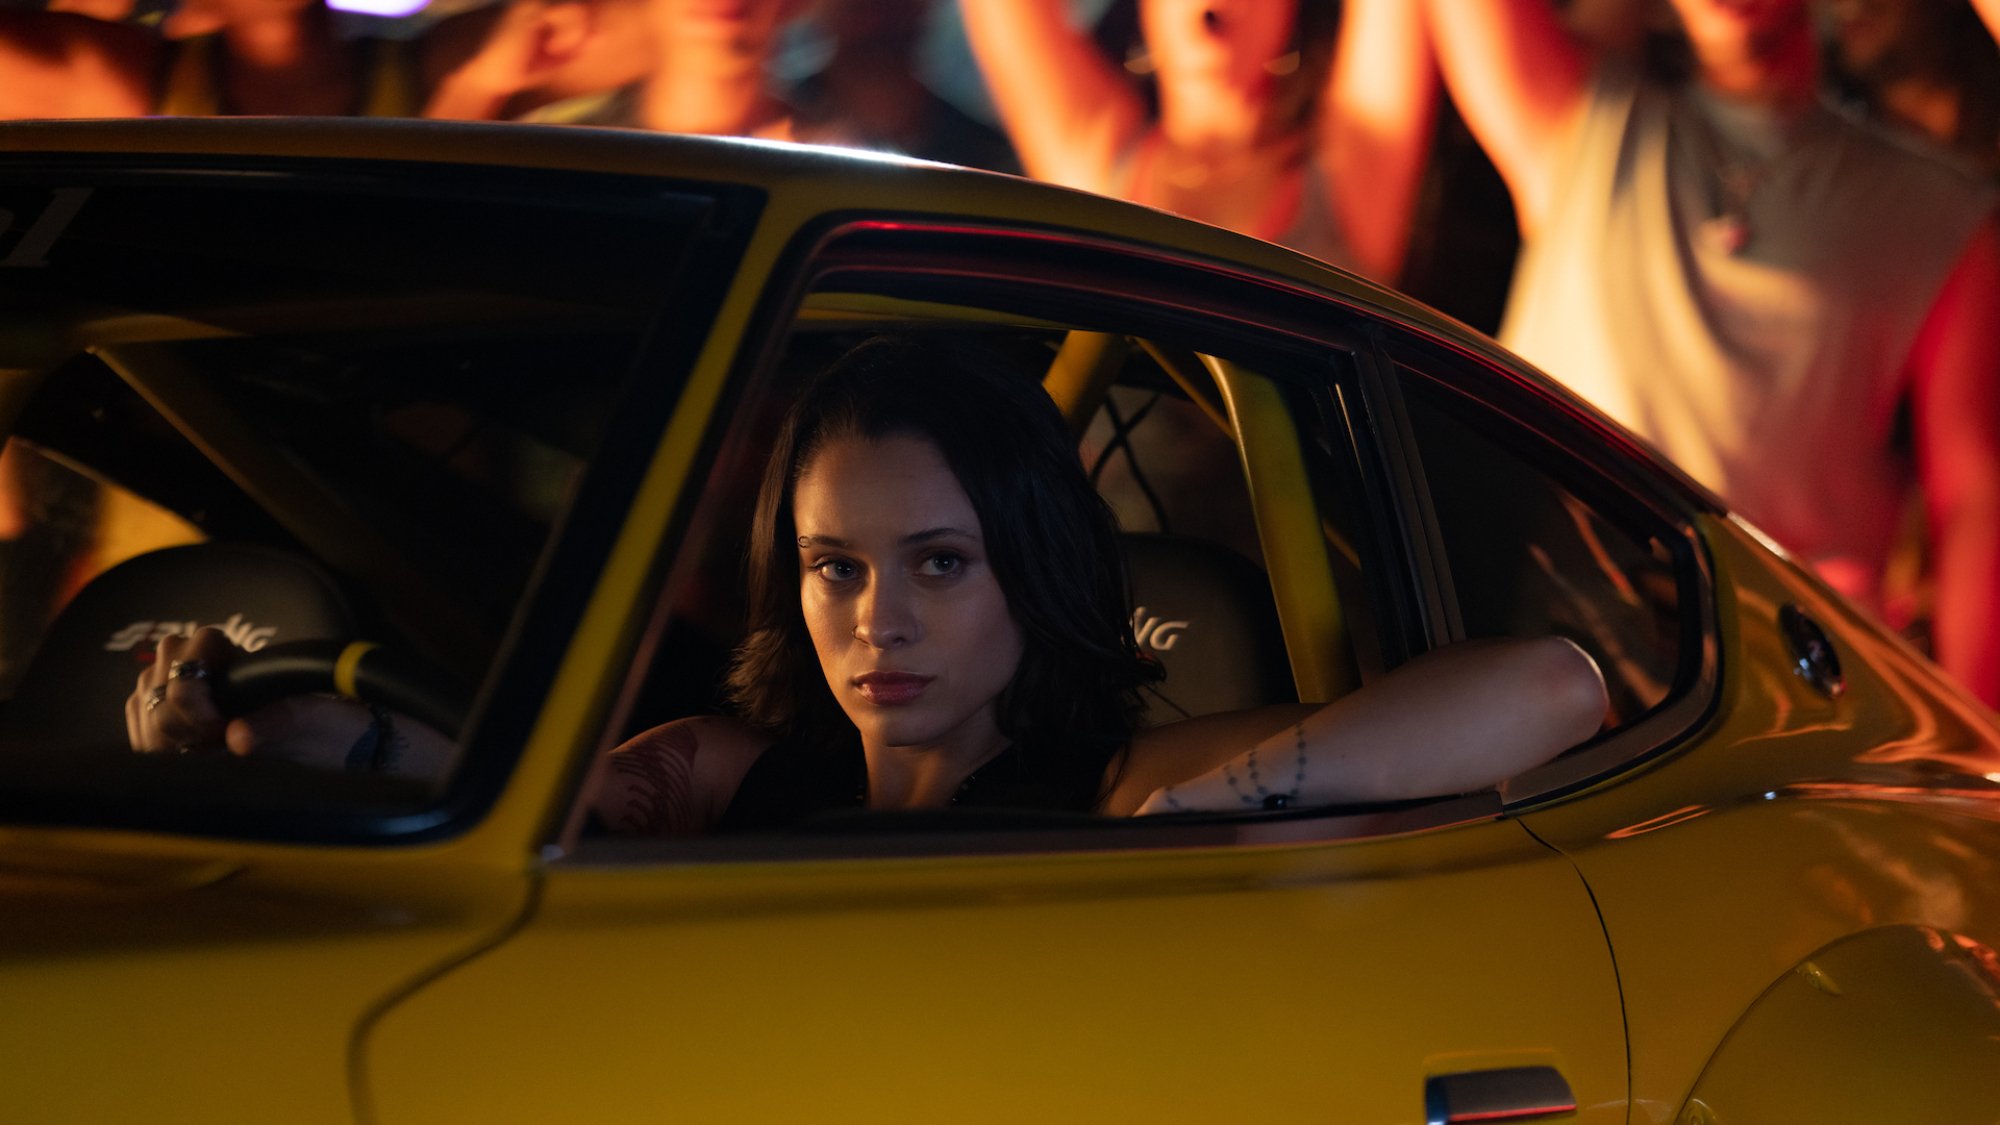 Daniela Melchior sits in a car surrounded by people in the film "Fast X."